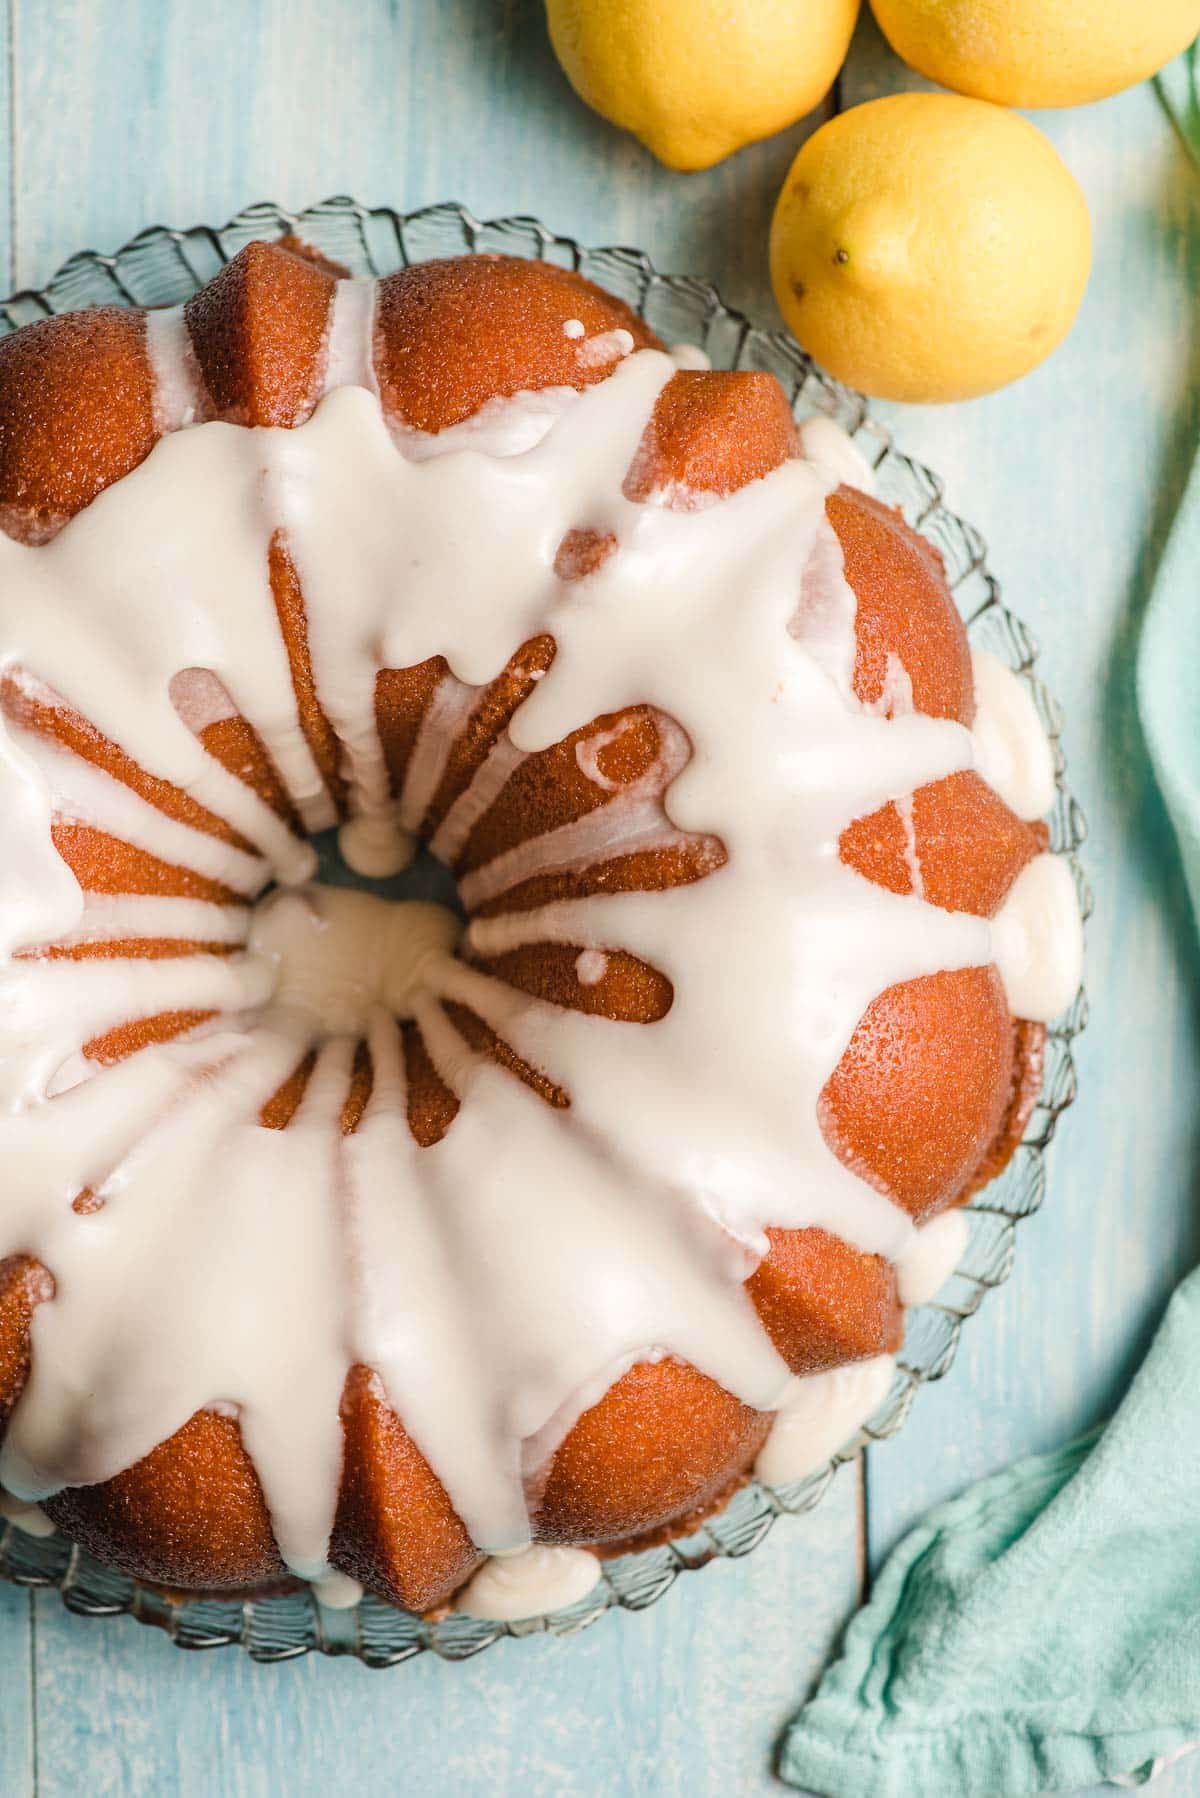 Icing cascading down the sides of a leon bundt cake.